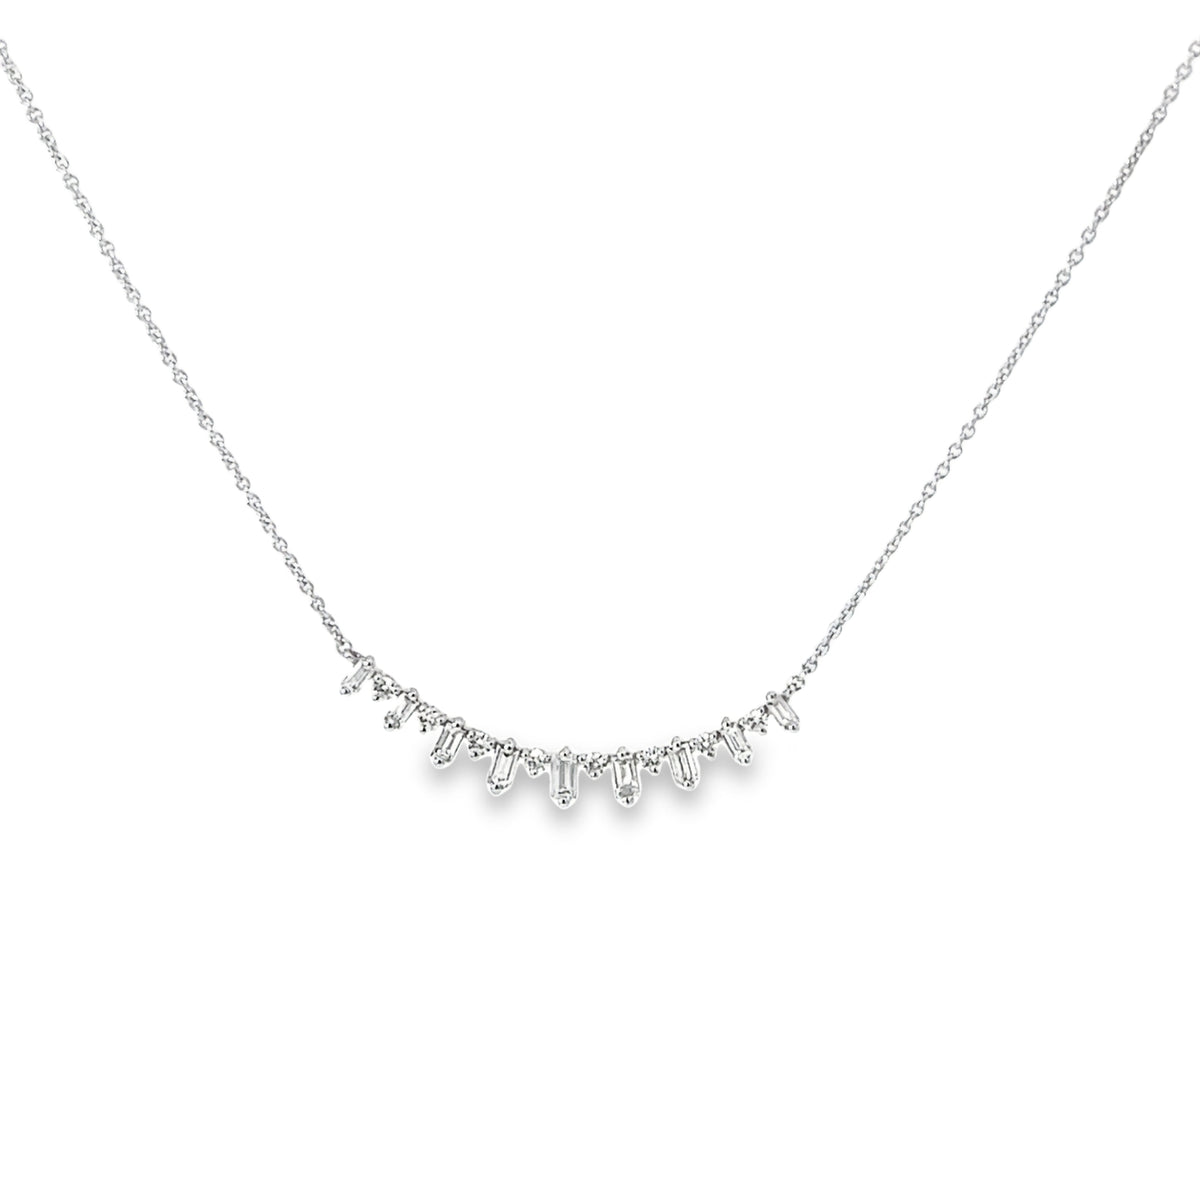 Ladies 14k white gold Curved Diamond Bar Necklace